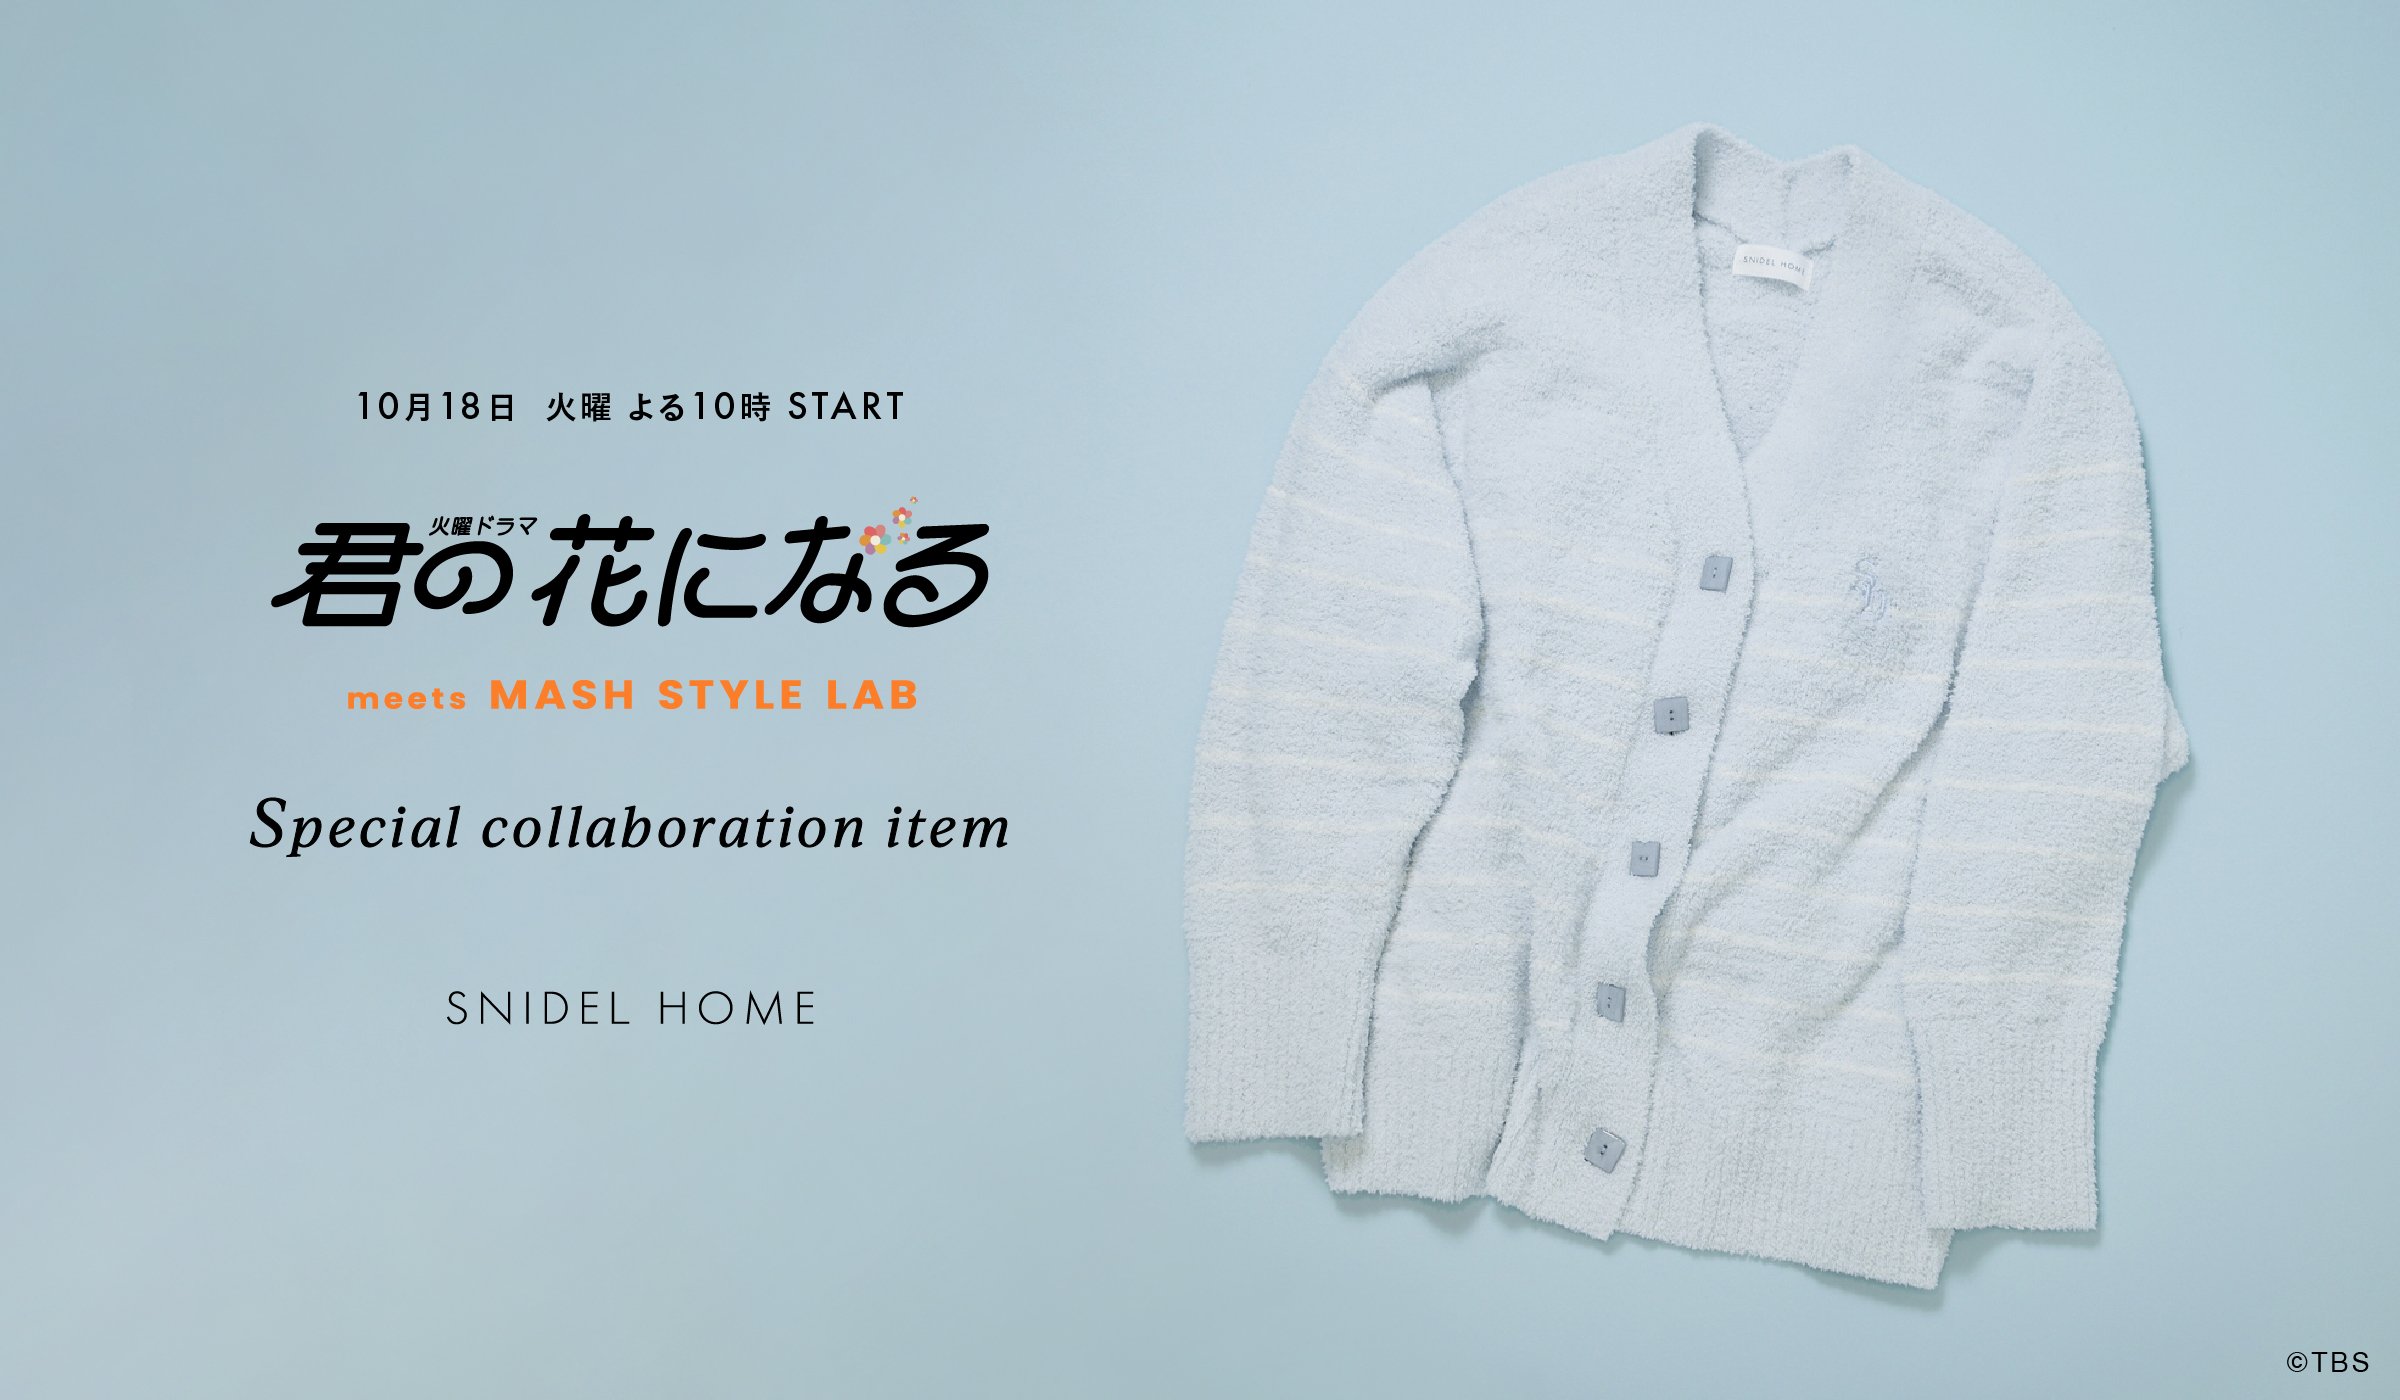 SNIDEL HOME special collaboration item